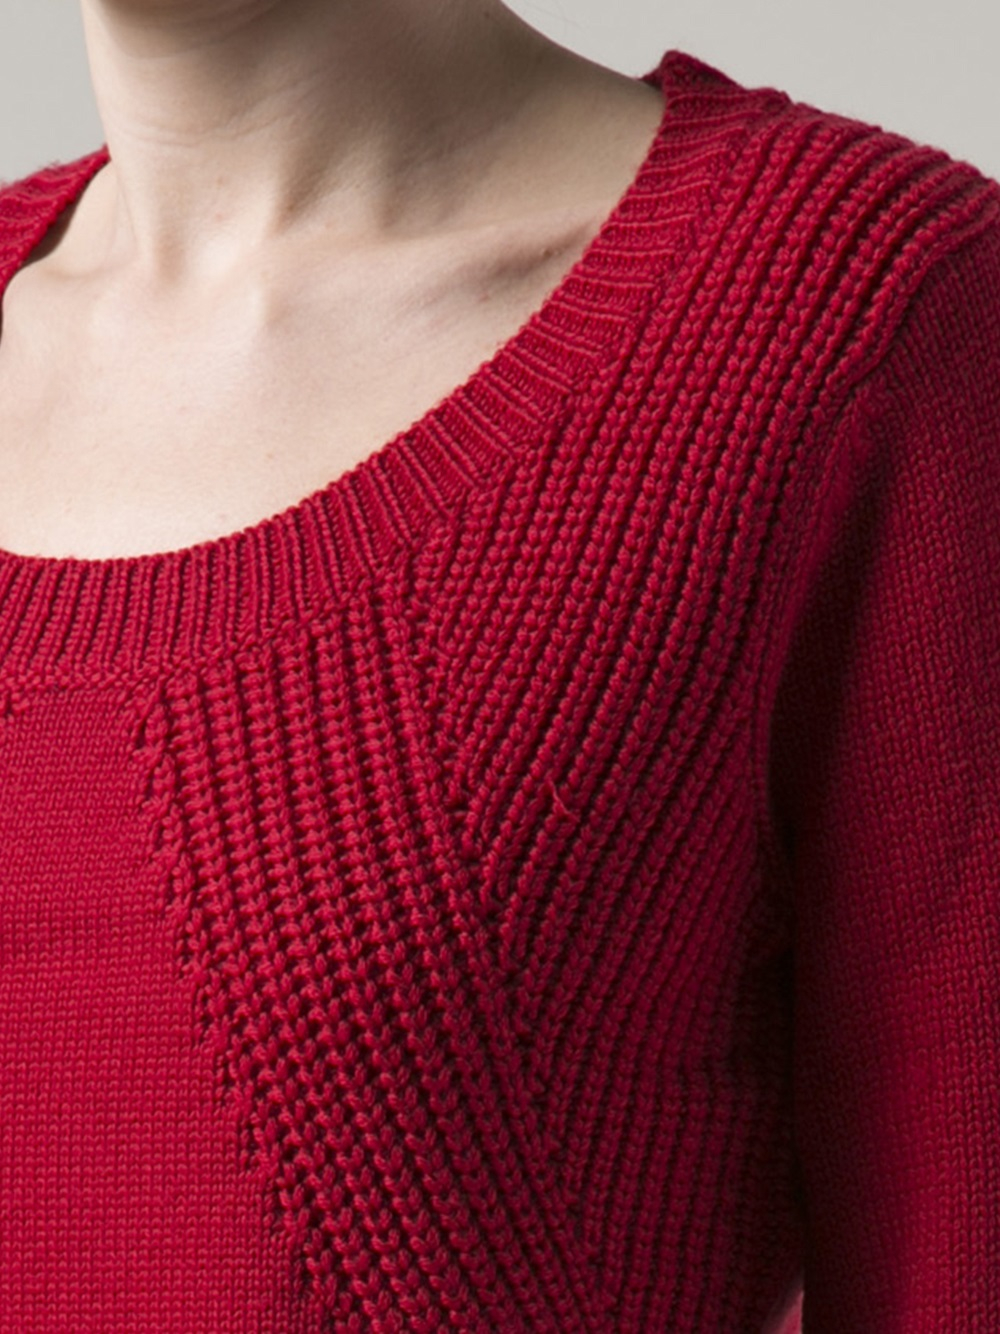 Rag & bone Camron Pullover Sweater in Red | Lyst